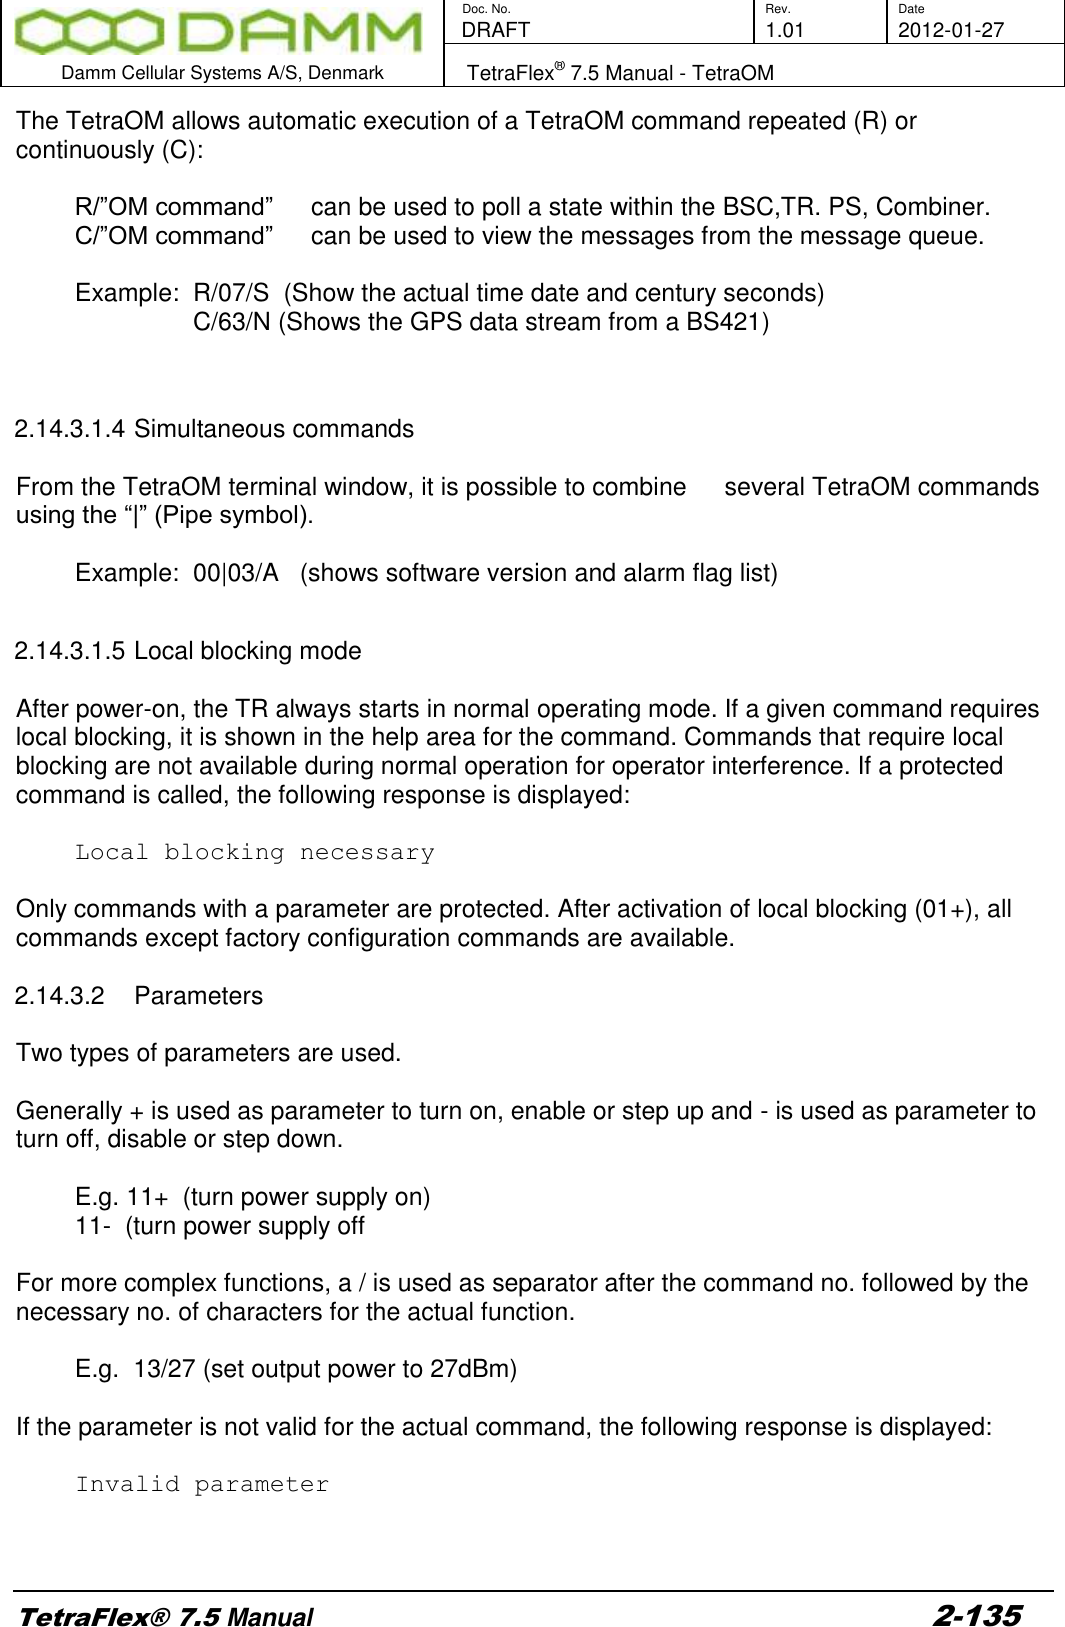        Doc. No. Rev. Date    DRAFT  1.01 2012-01-27  Damm Cellular Systems A/S, Denmark   TetraFlex® 7.5 Manual - TetraOM  TetraFlex® 7.5 Manual 2-135 The TetraOM allows automatic execution of a TetraOM command repeated (R) or continuously (C):  R/”OM command”   can be used to poll a state within the BSC,TR. PS, Combiner. C/”OM command”   can be used to view the messages from the message queue.   Example:  R/07/S  (Show the actual time date and century seconds)  C/63/N (Shows the GPS data stream from a BS421)   2.14.3.1.4 Simultaneous commands  From the TetraOM terminal window, it is possible to combine   several TetraOM commands using the “|” (Pipe symbol).    Example:  00|03/A   (shows software version and alarm flag list)  2.14.3.1.5 Local blocking mode  After power-on, the TR always starts in normal operating mode. If a given command requires local blocking, it is shown in the help area for the command. Commands that require local blocking are not available during normal operation for operator interference. If a protected command is called, the following response is displayed:  Local blocking necessary  Only commands with a parameter are protected. After activation of local blocking (01+), all commands except factory configuration commands are available.  2.14.3.2  Parameters  Two types of parameters are used.  Generally + is used as parameter to turn on, enable or step up and - is used as parameter to turn off, disable or step down.    E.g. 11+  (turn power supply on)  11-  (turn power supply off  For more complex functions, a / is used as separator after the command no. followed by the necessary no. of characters for the actual function.    E.g.  13/27 (set output power to 27dBm)  If the parameter is not valid for the actual command, the following response is displayed:  Invalid parameter    